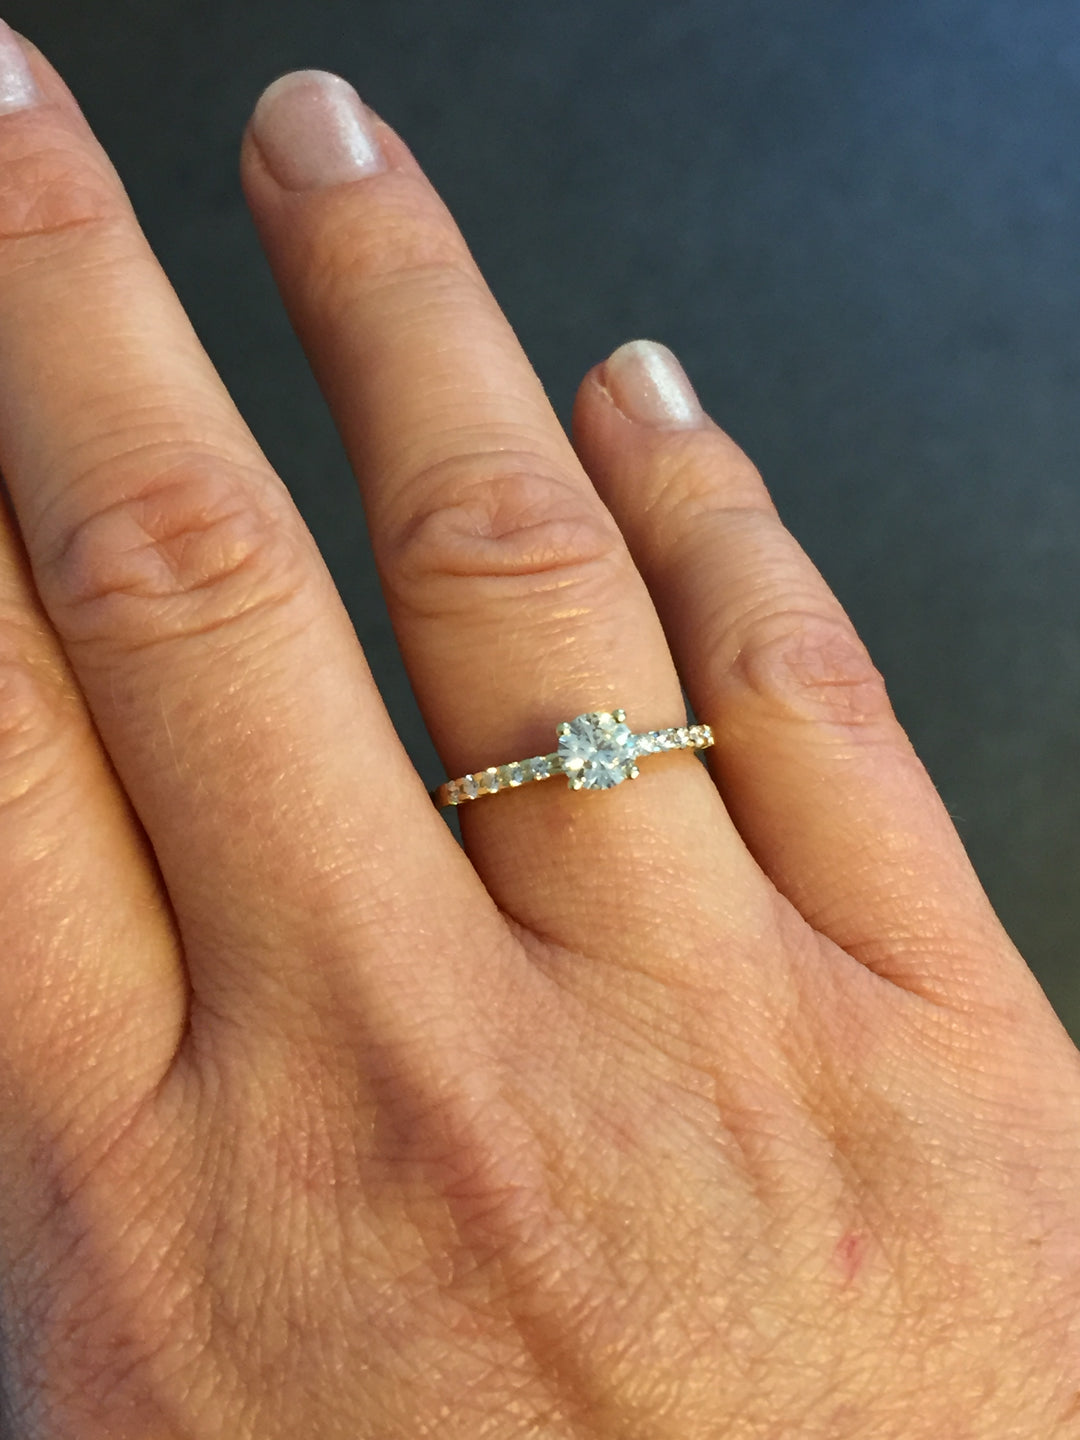 Solitairering med 0,64 ct brillant